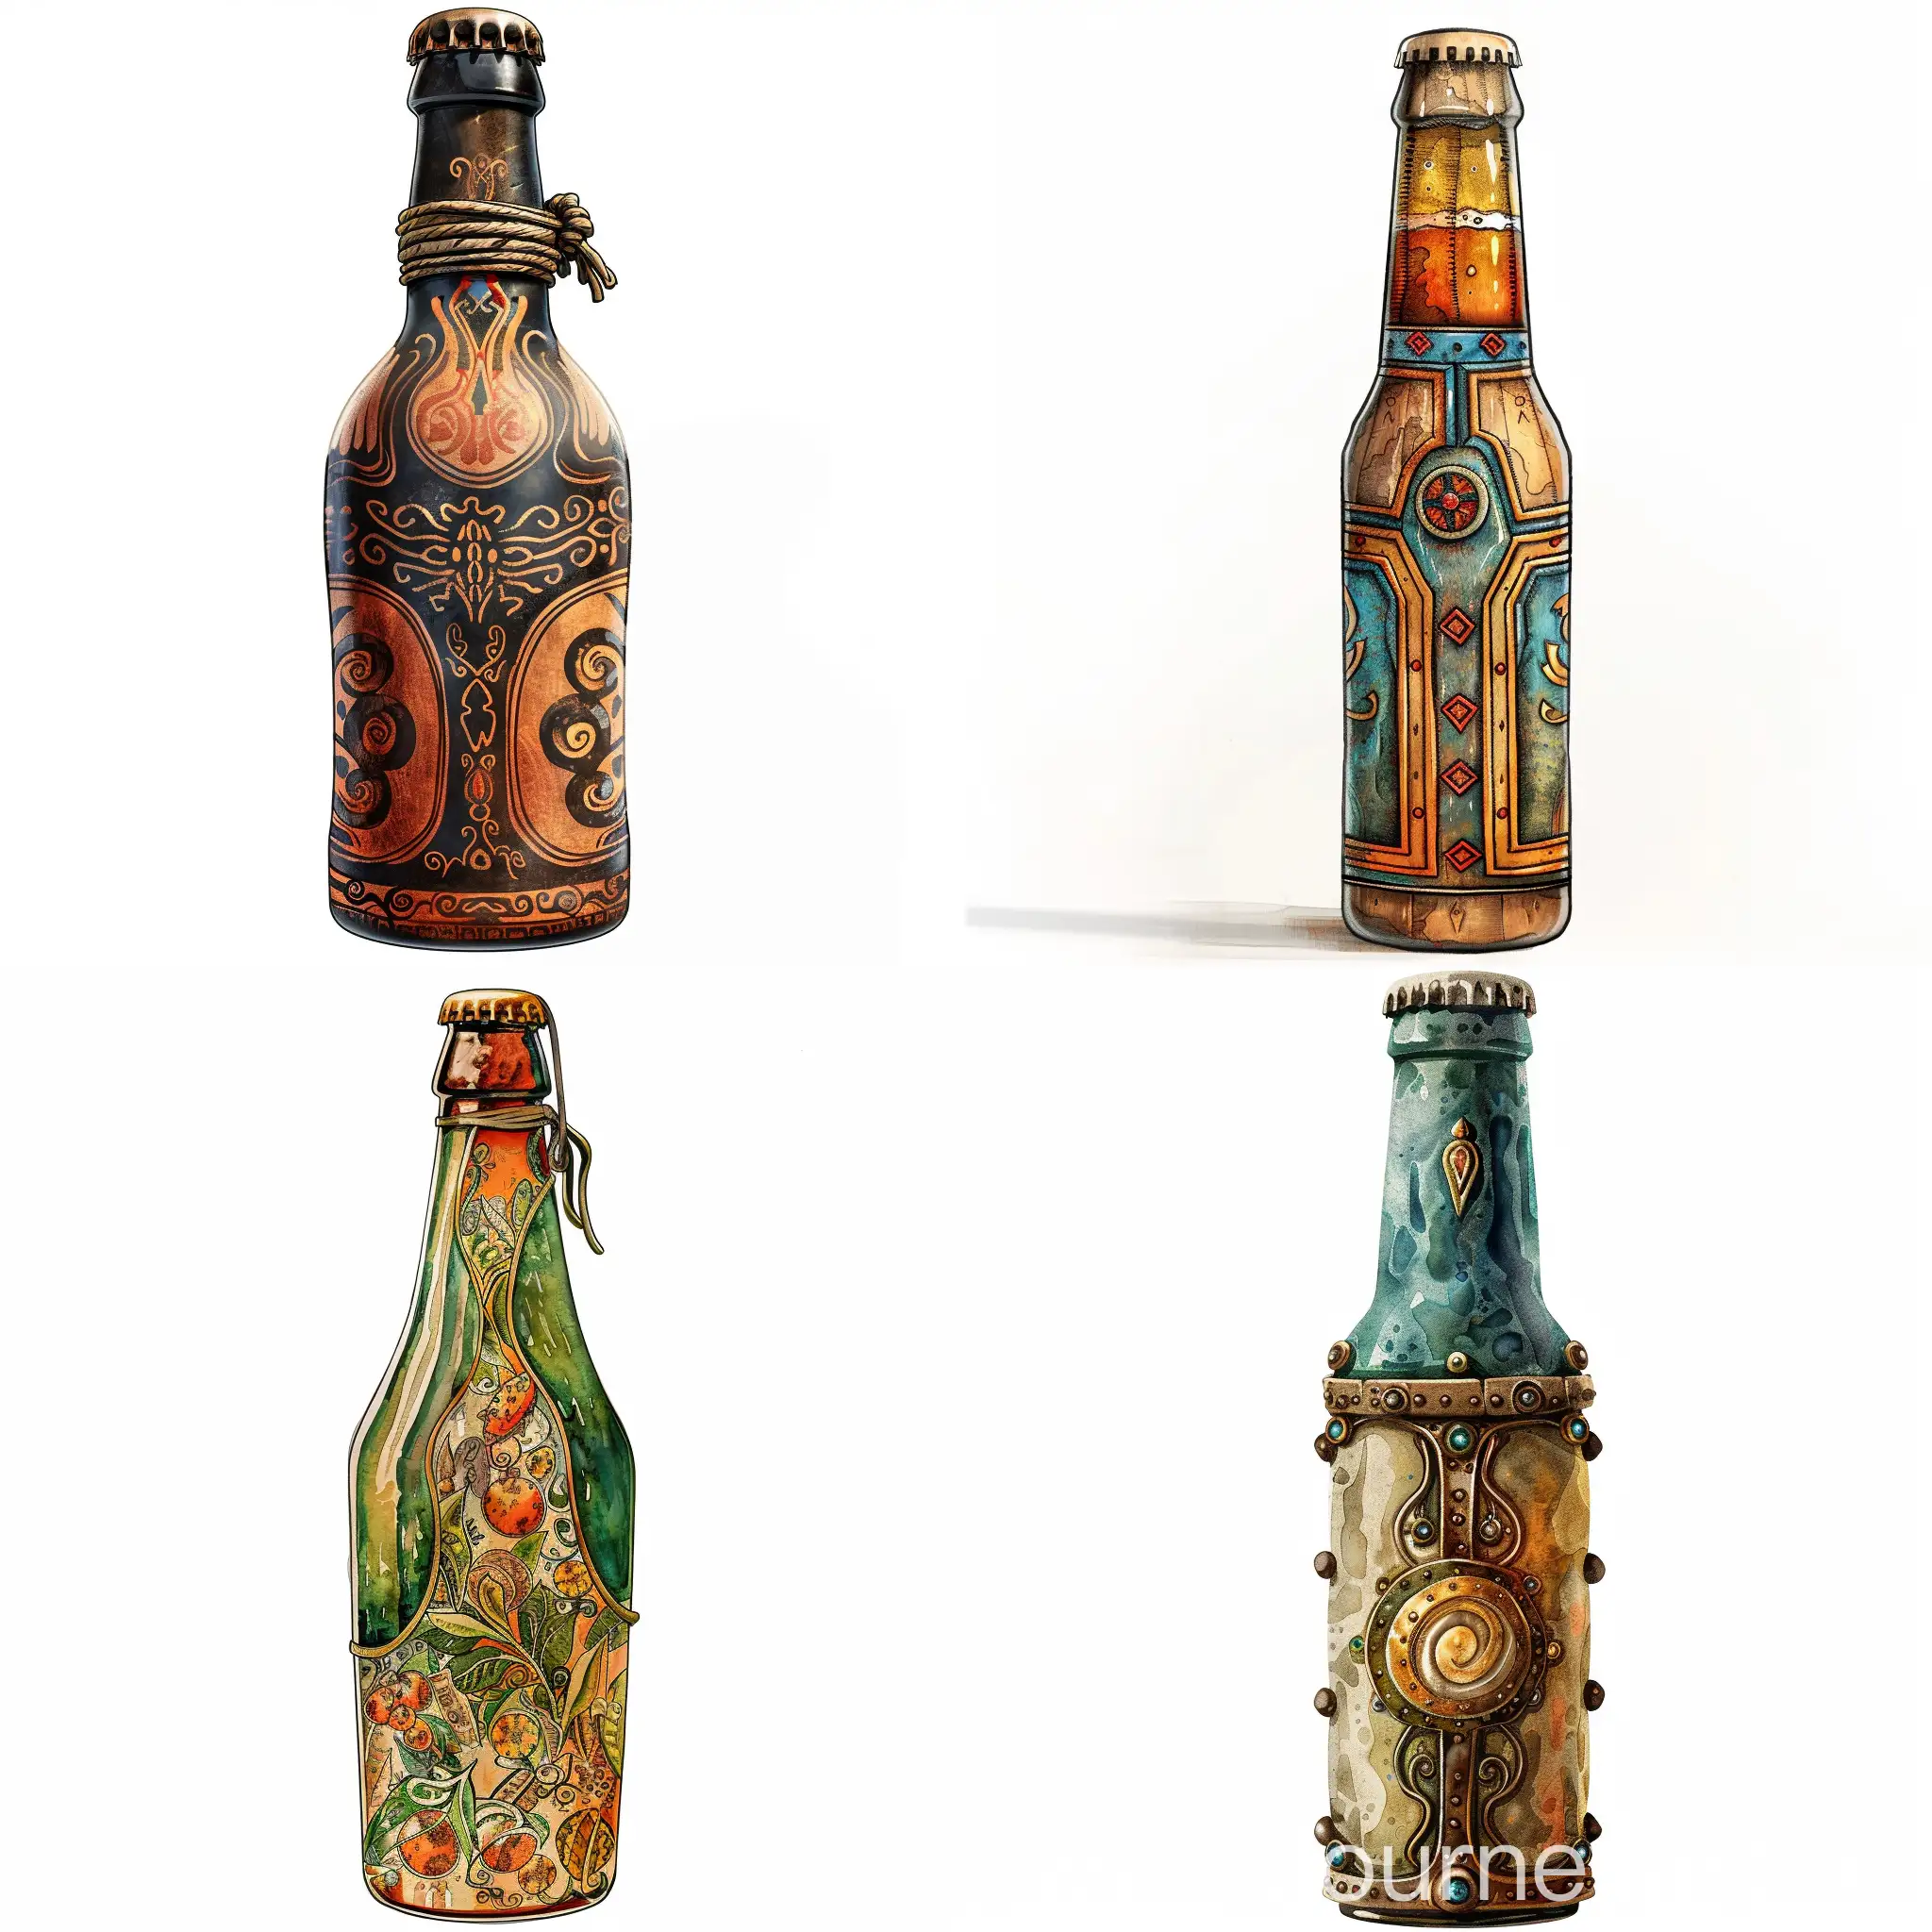 Vintage-Beer-Bottle-Illustration-with-Intricate-Colors-on-White-Background